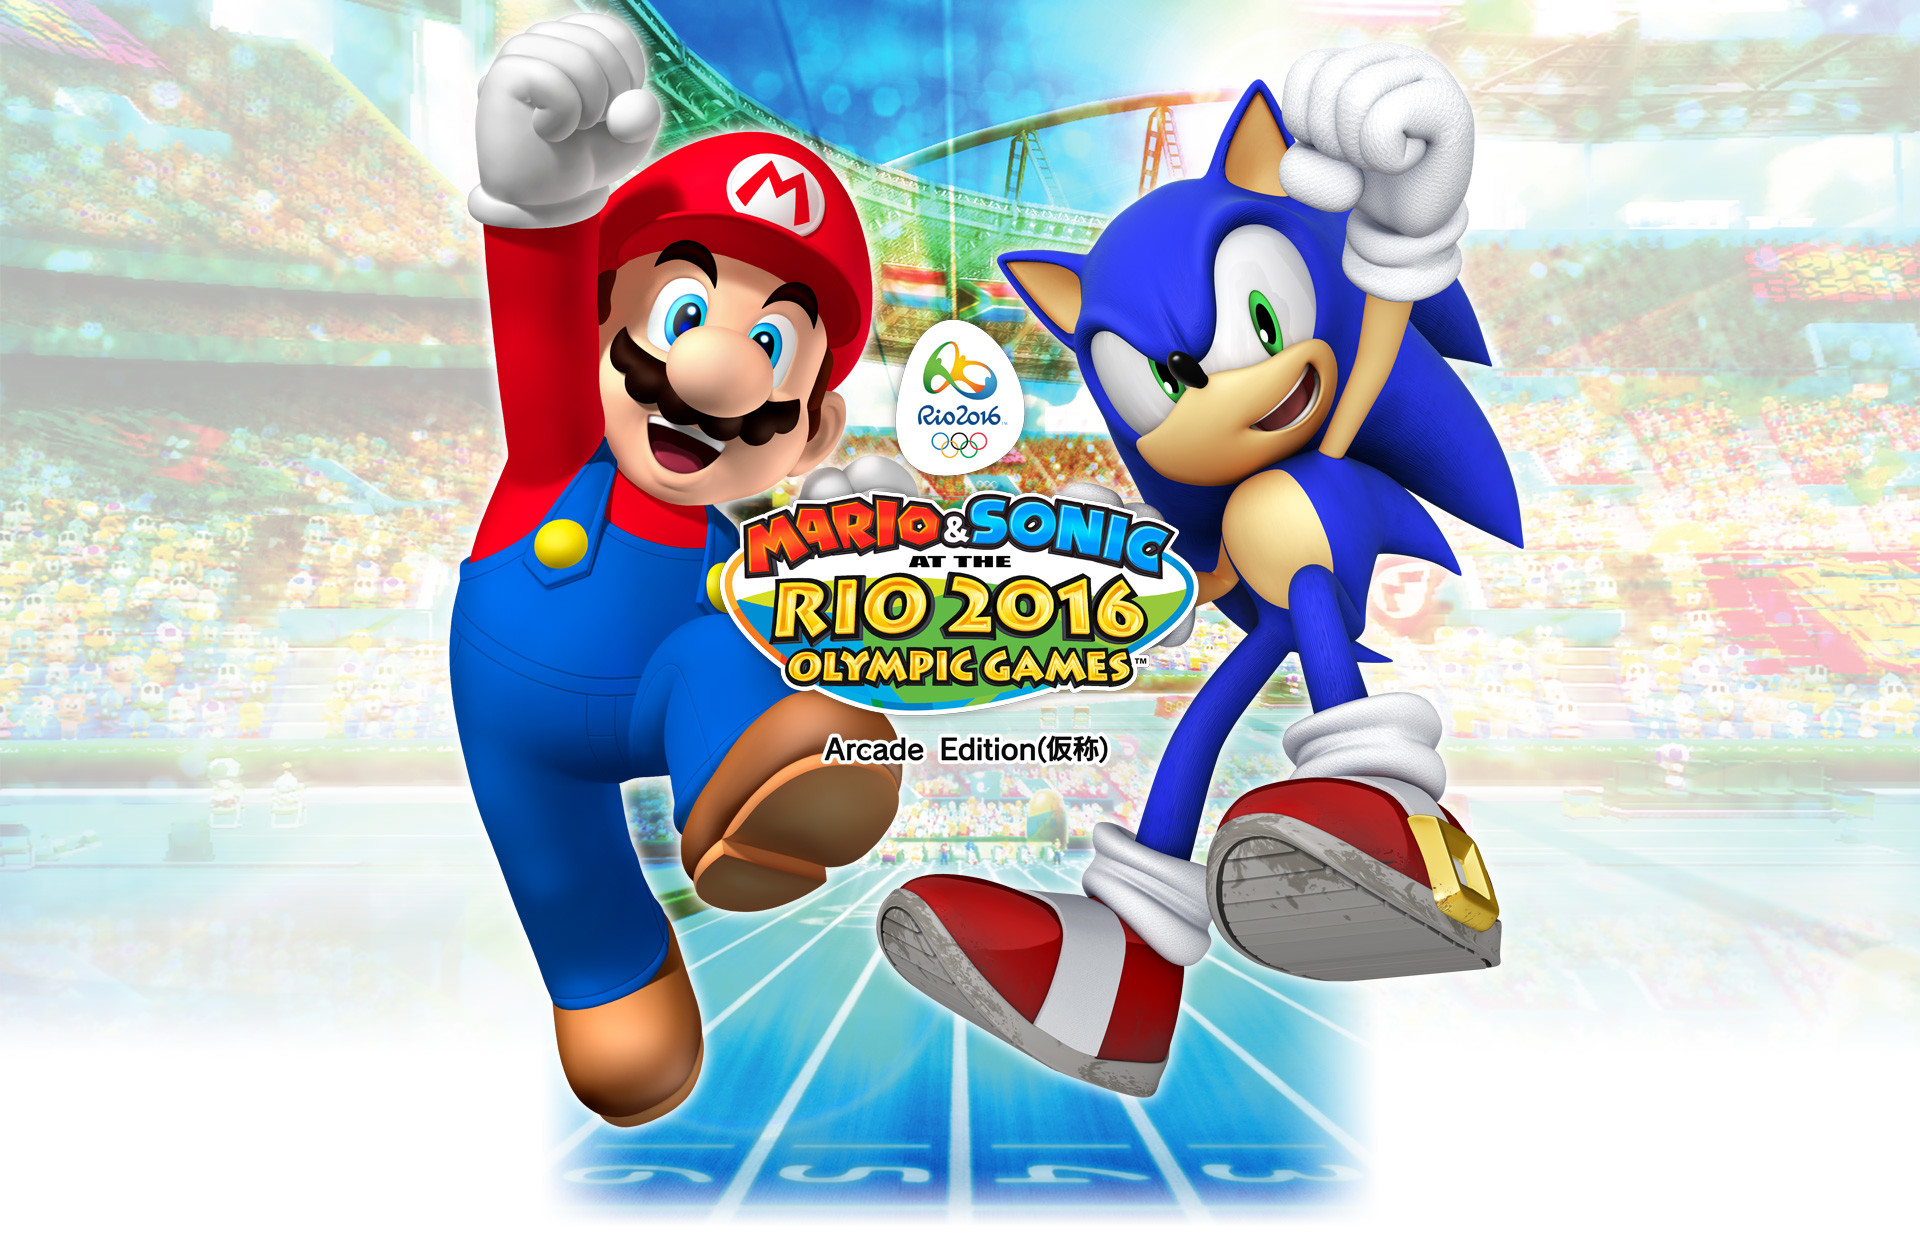 1920x1233 Mario & Sonic at the Rio 2016 Olympic Games heading to Japanese arcades in  Spring 2016